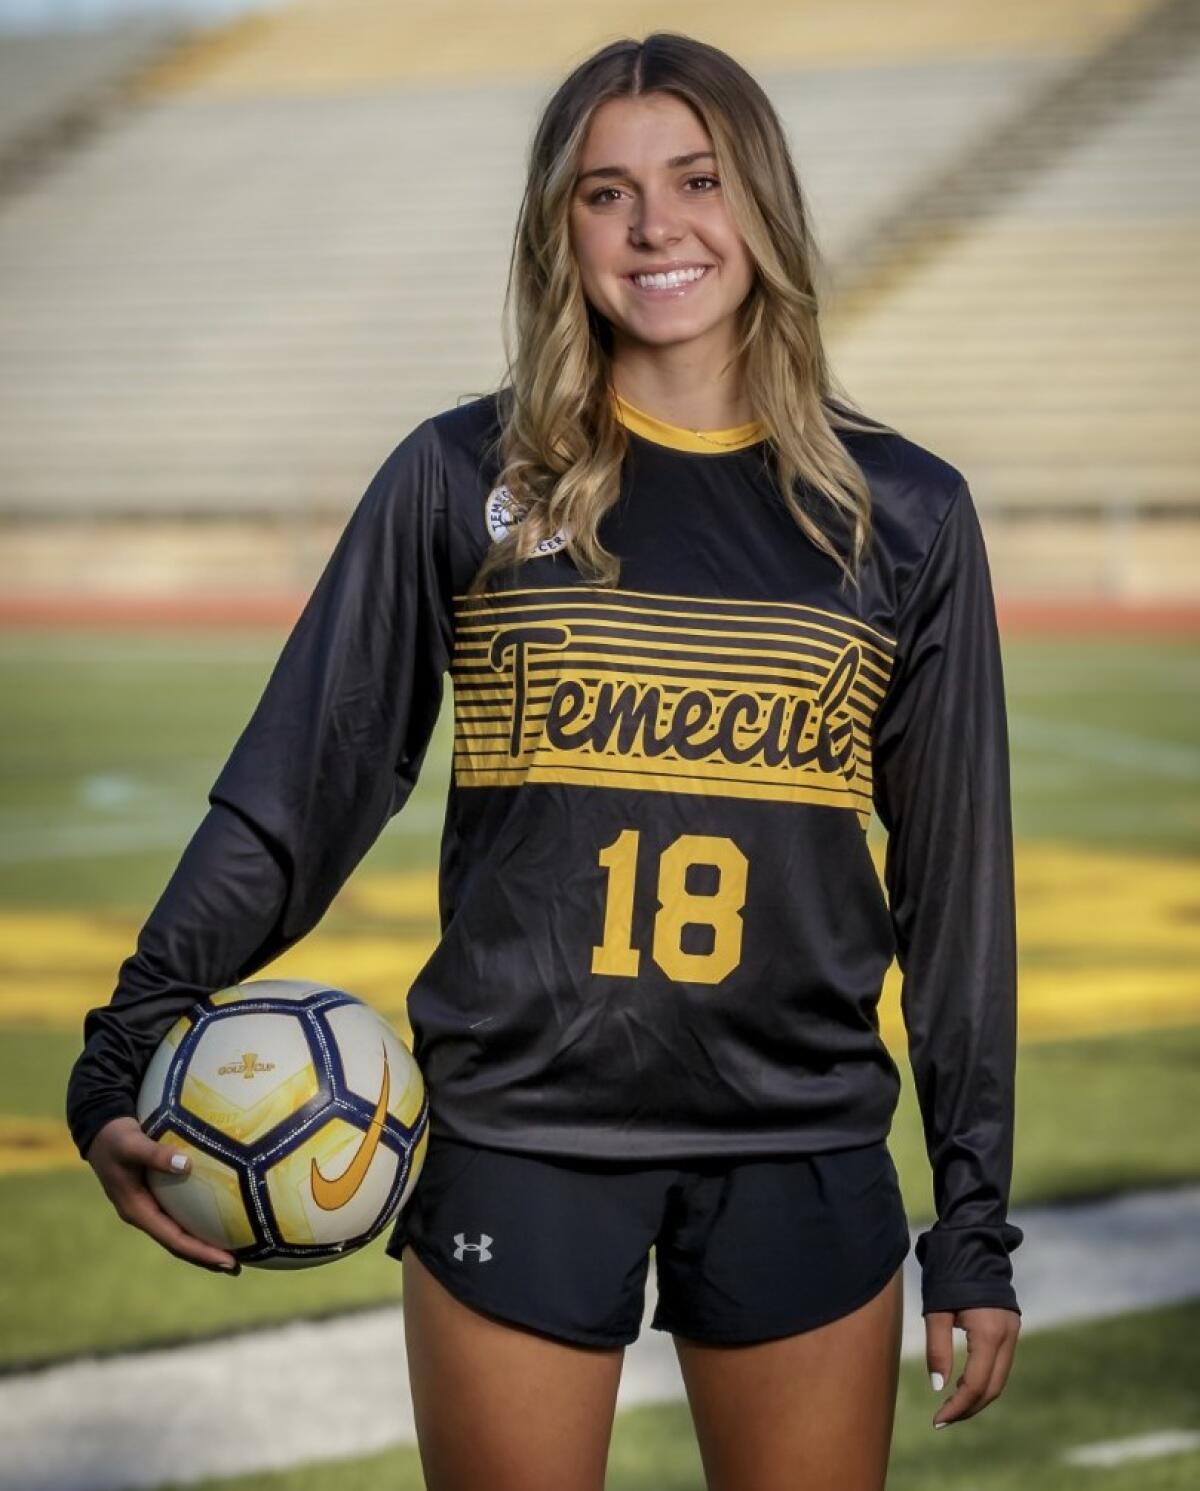 Kate Jacobsen of Temecula Valley was named state player of the year in girls' soccer by United Soccer.